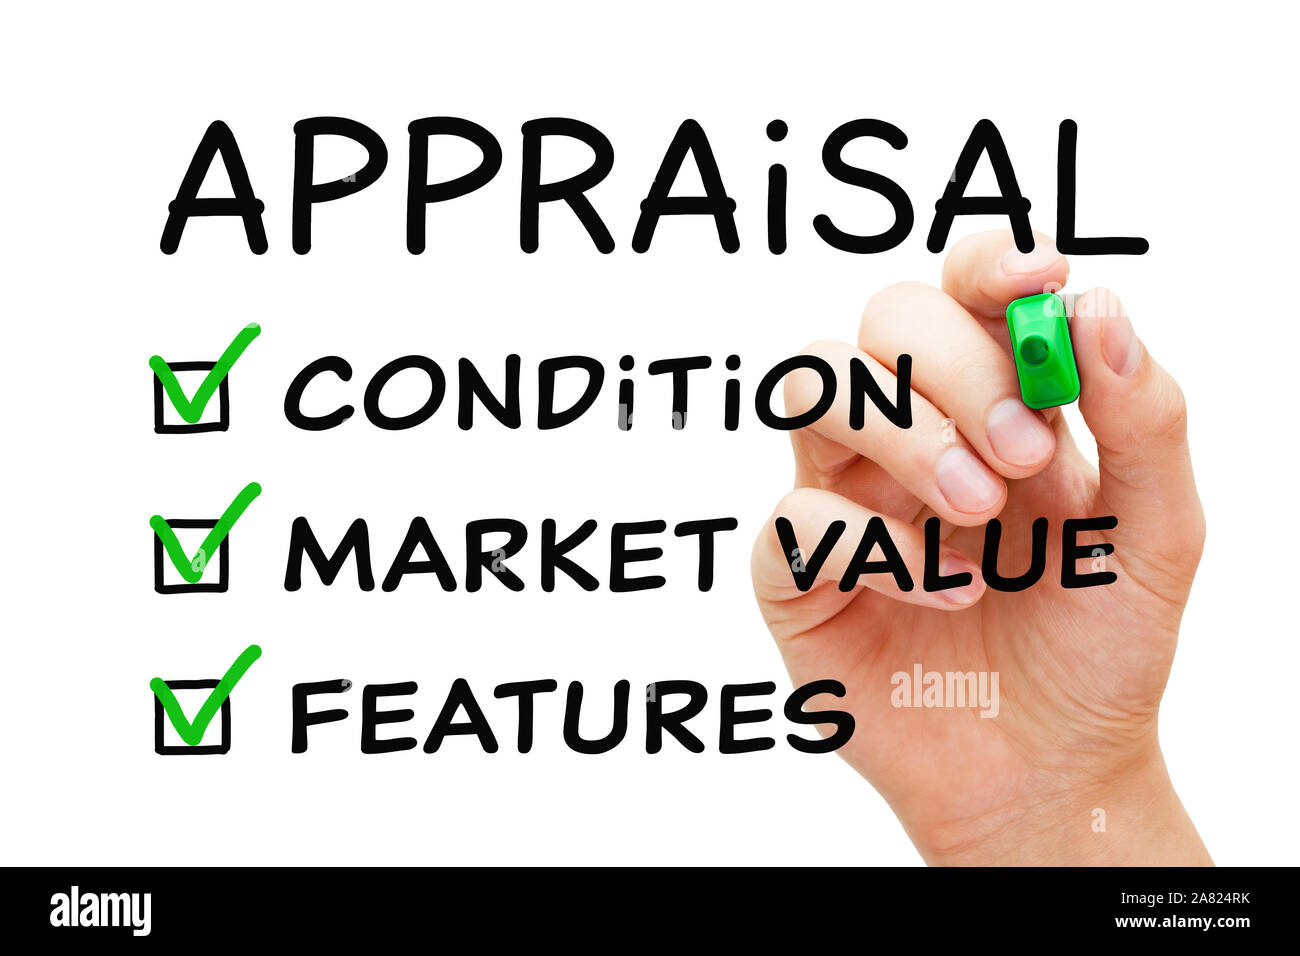 Hand filling Appraisal checklist business concept with checked boxes on condition, market value and features. Stock Photo